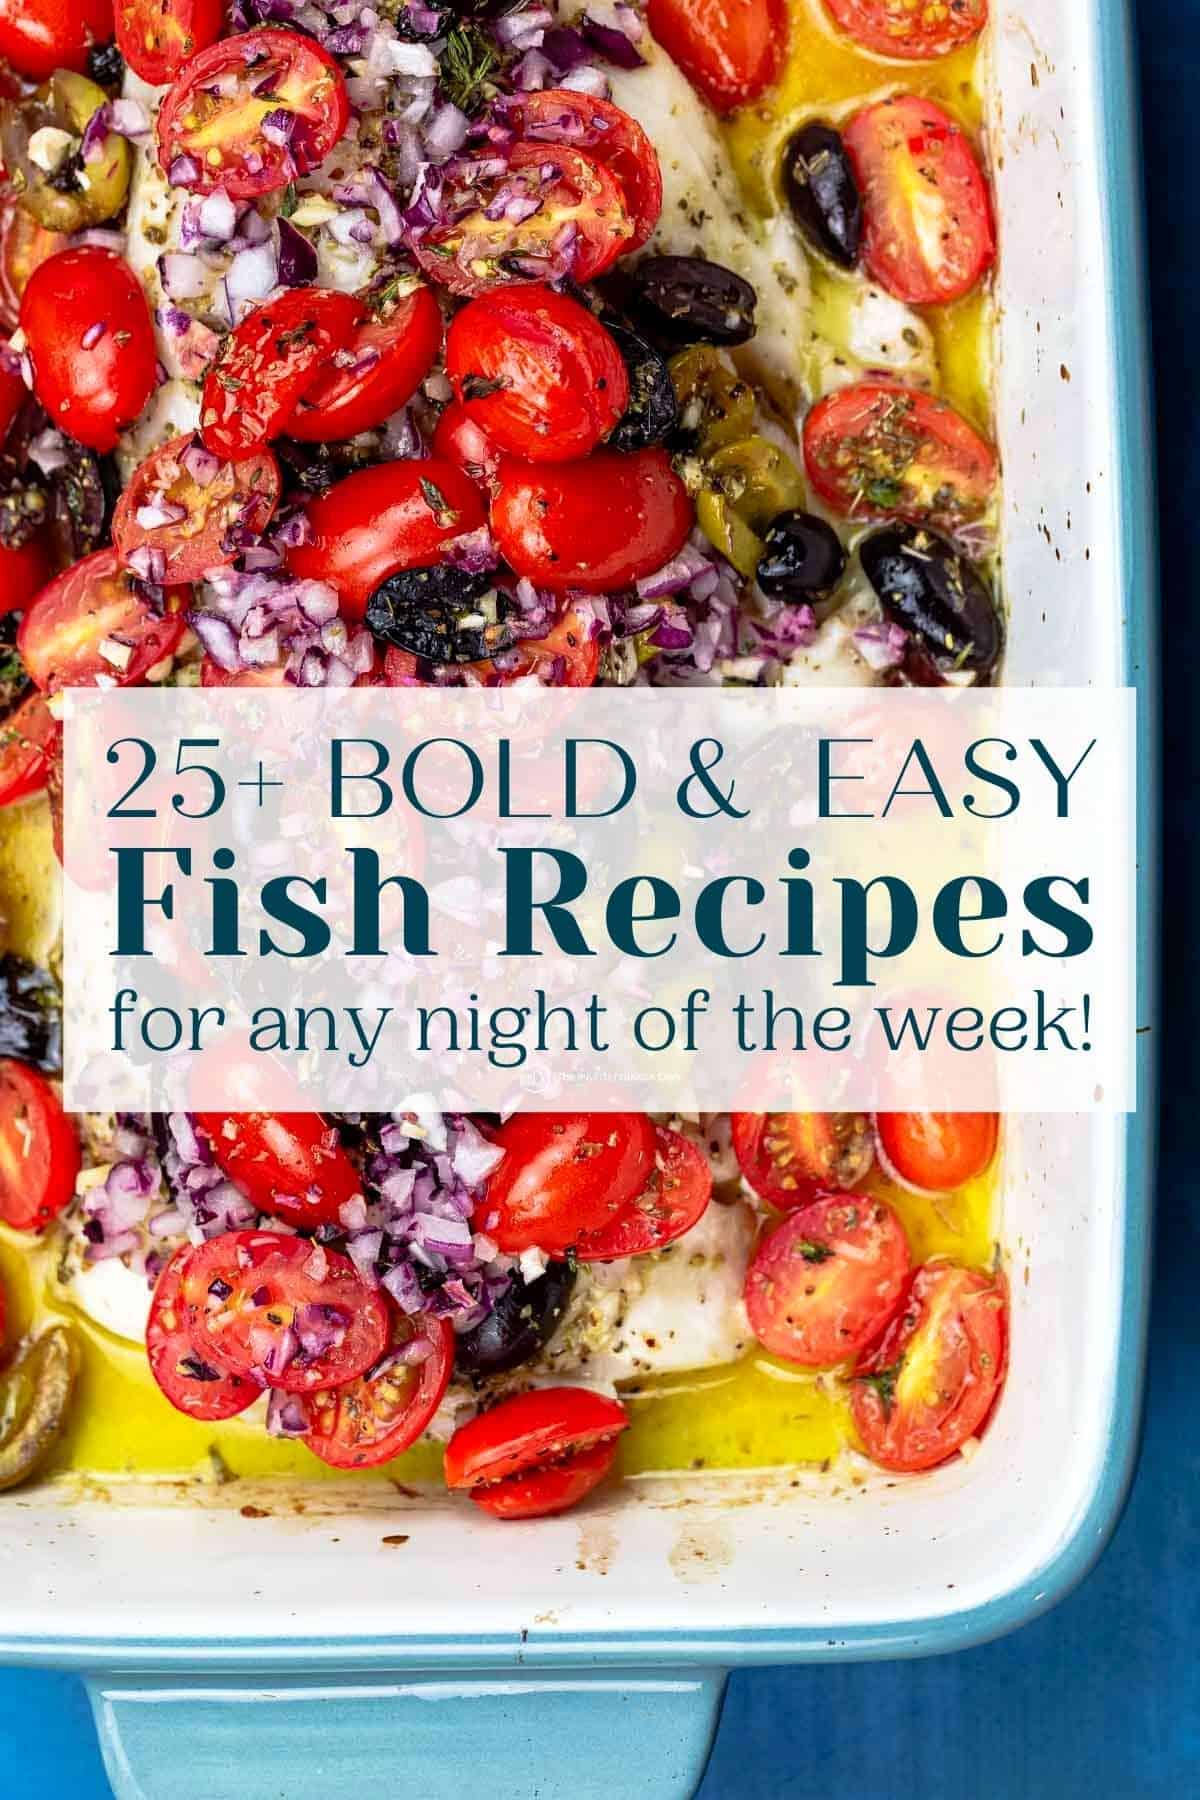 image for fish recipes roundup with text featuring baked white fish with tomatoes and olives